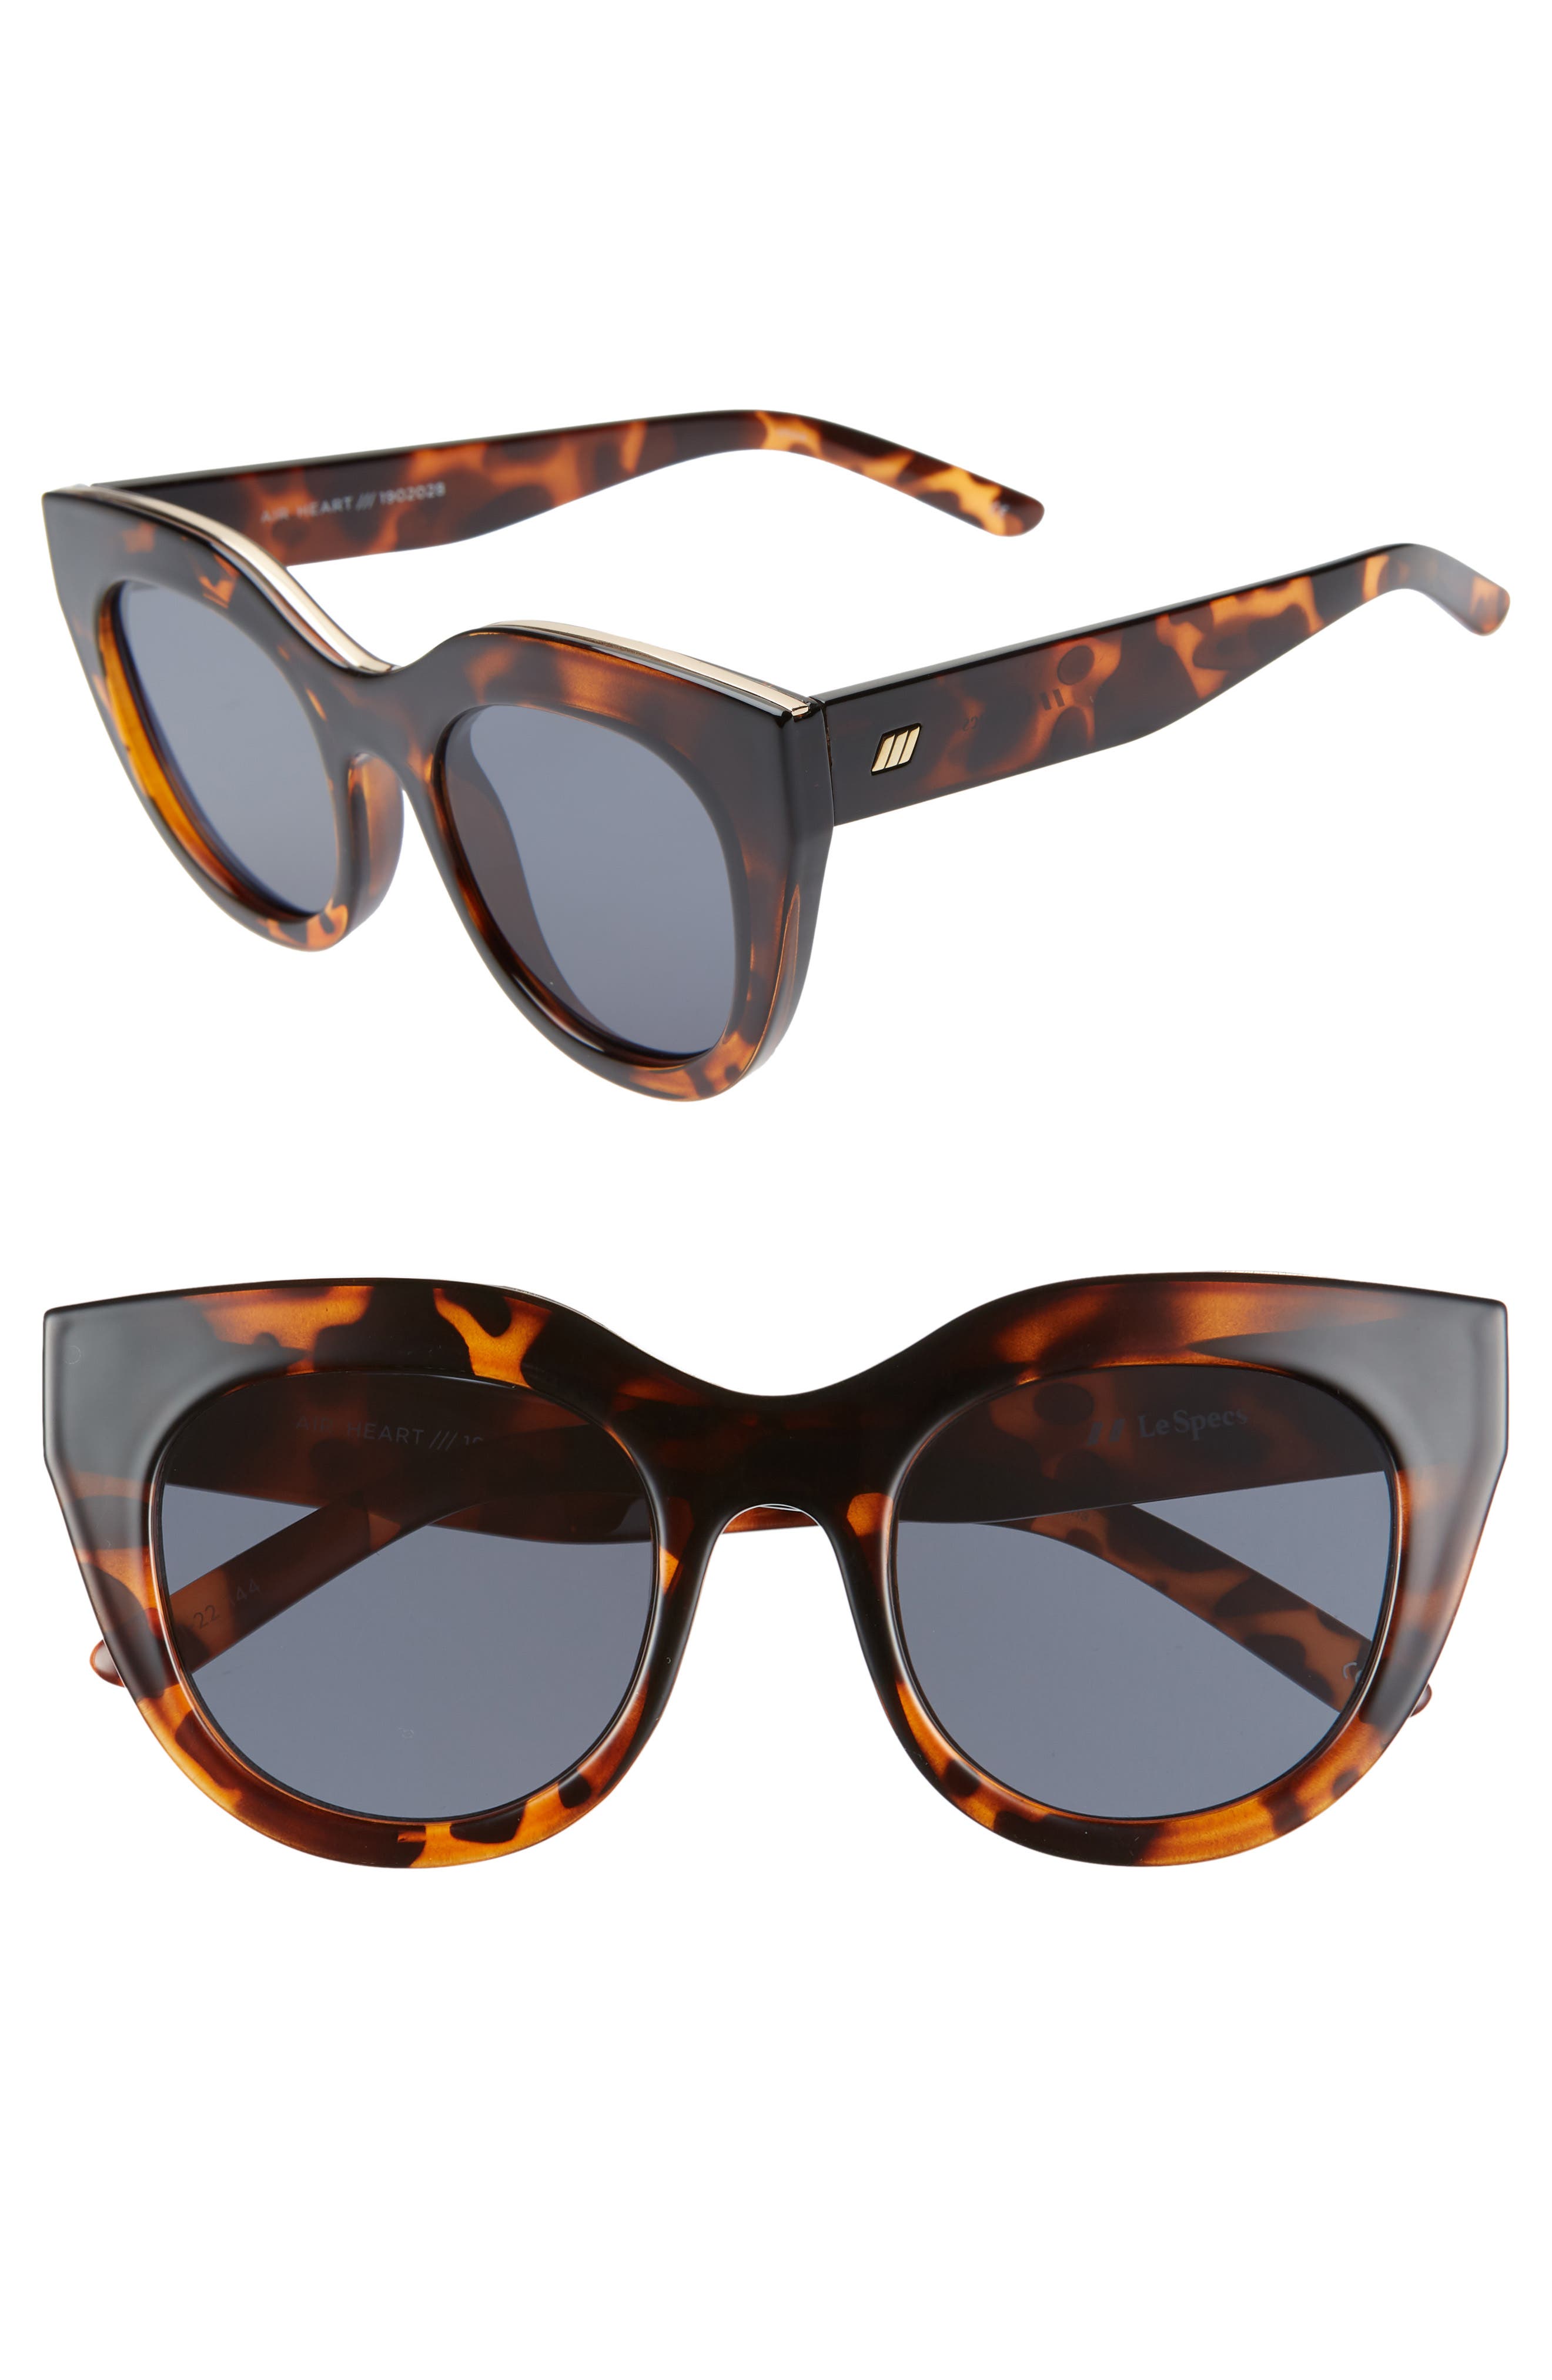 Le Specs Air Heart 51mm Sunglasses in Tortoise/Smoke at Nordstrom